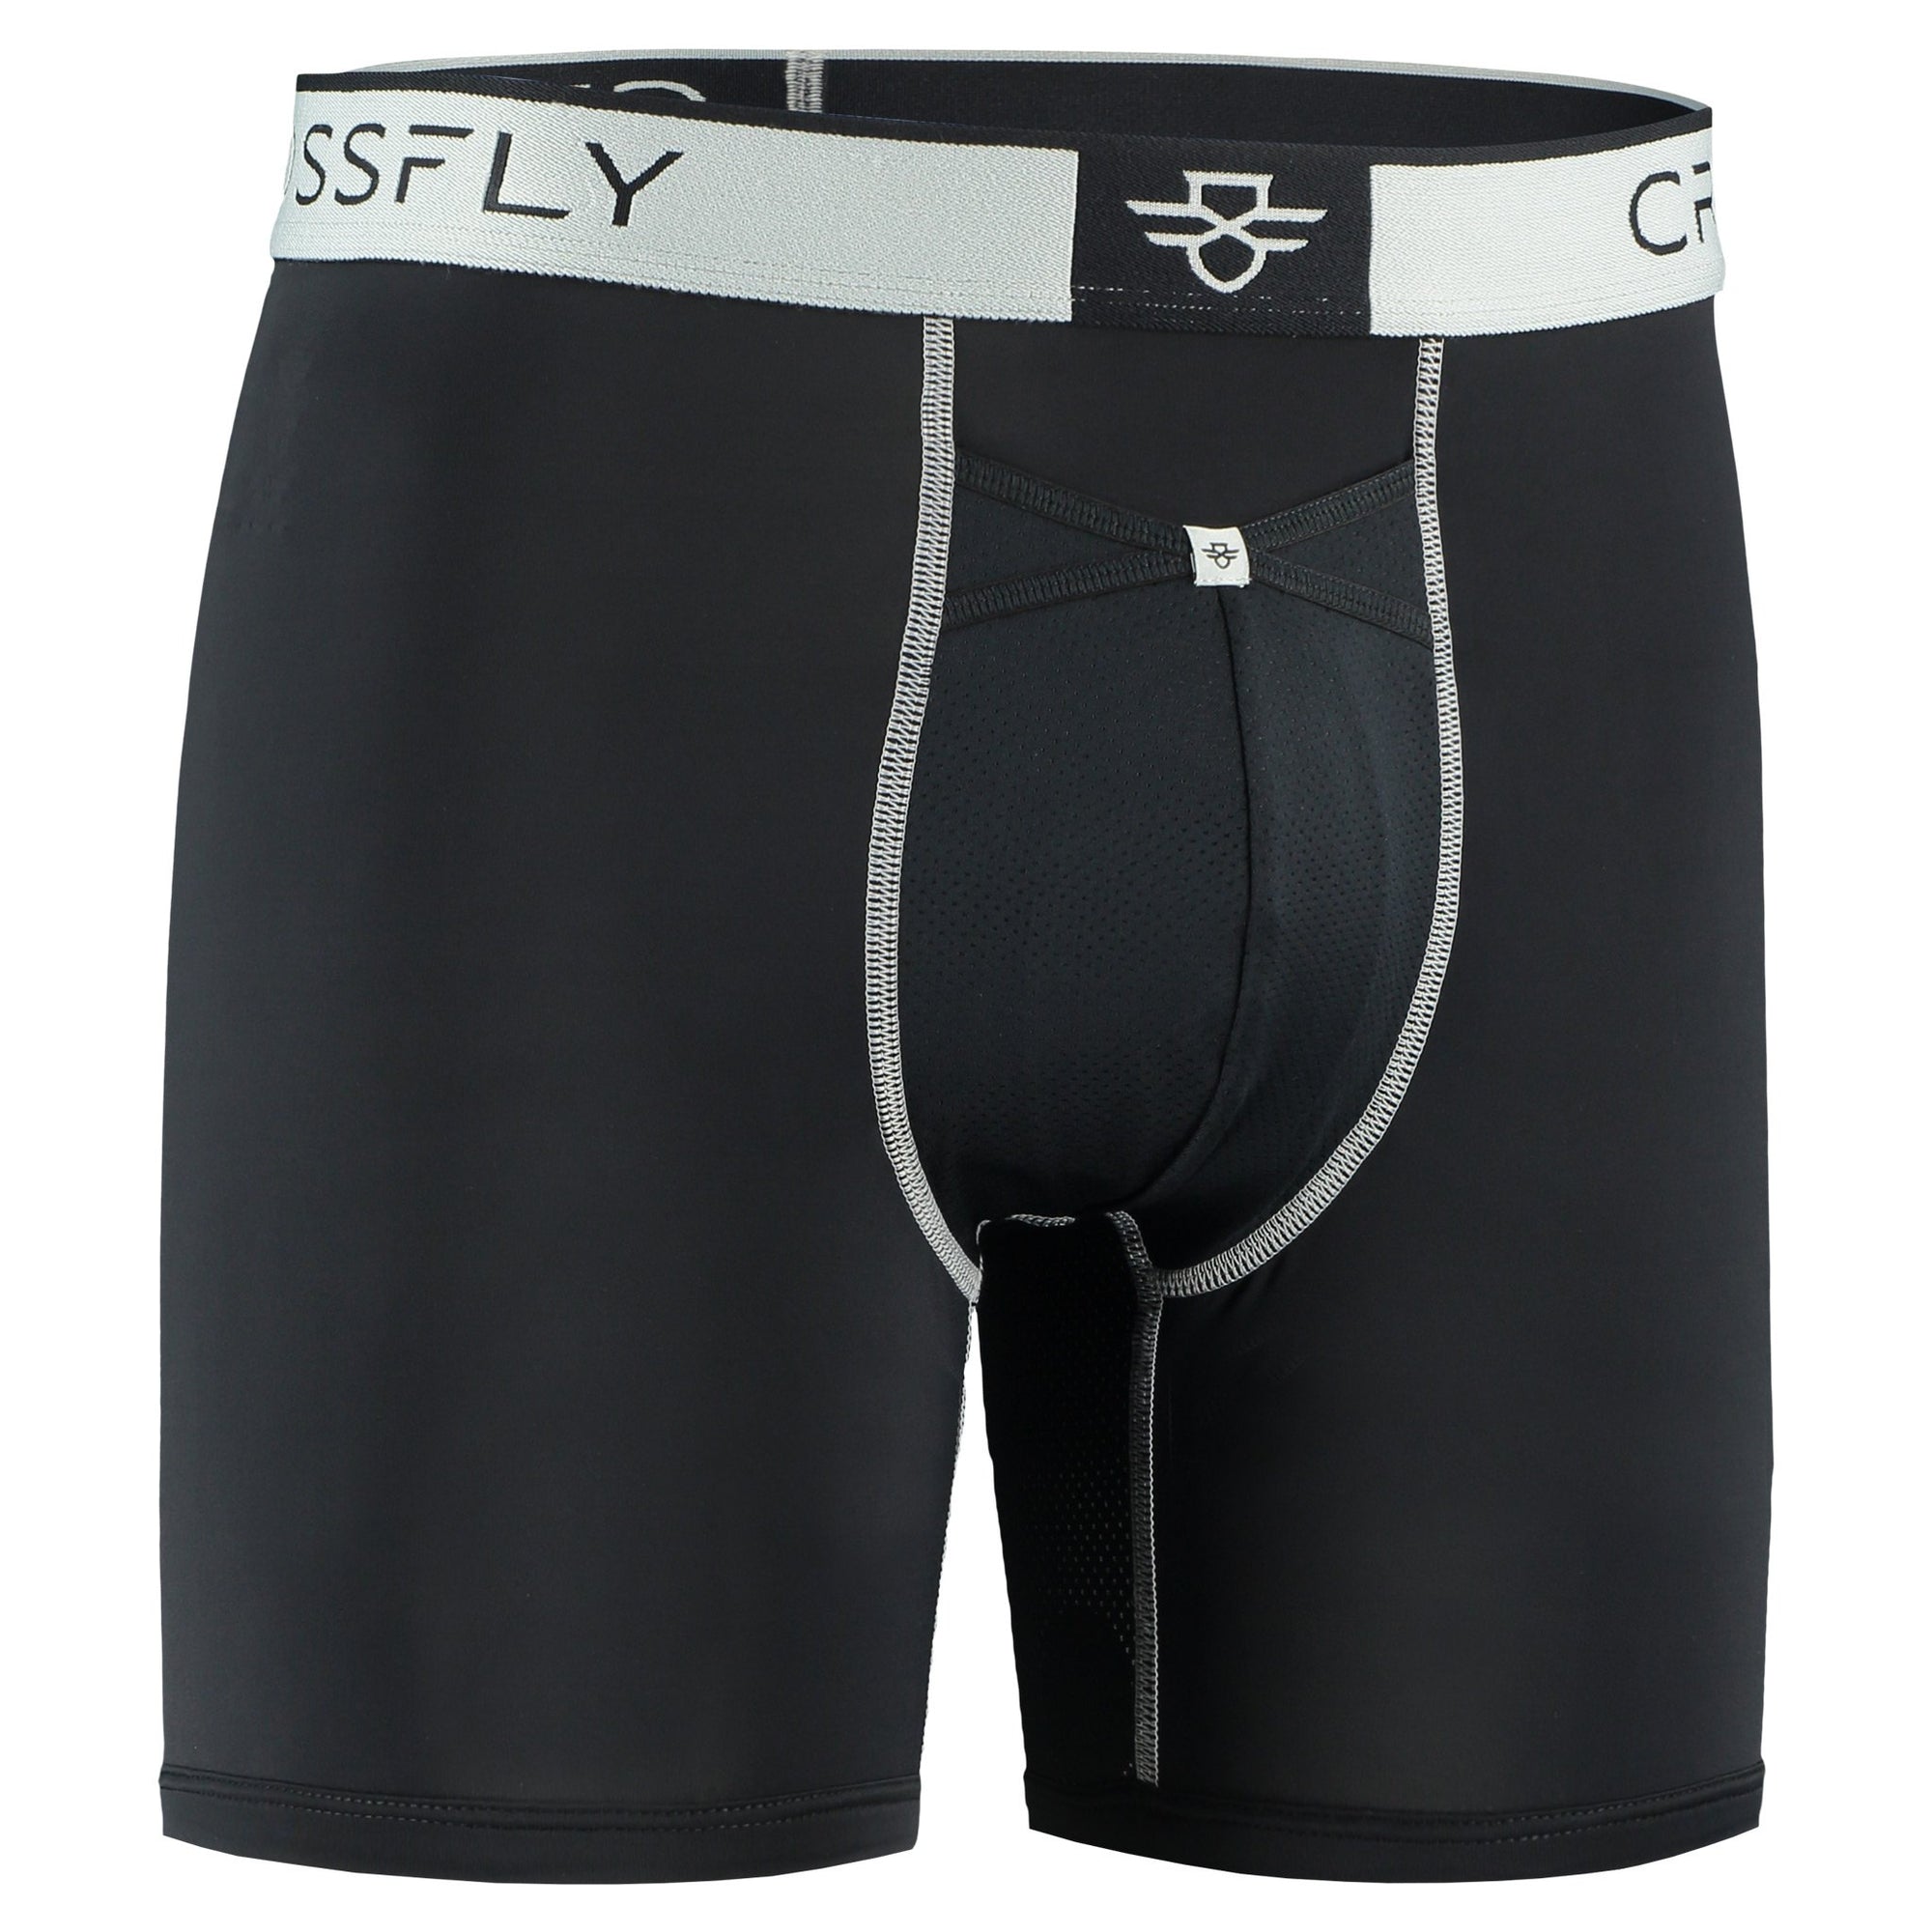 Crossfly men's Pro 7" black / silver boxers from the Performance series, featuring X-Fly and Coccoon internal pocket support.